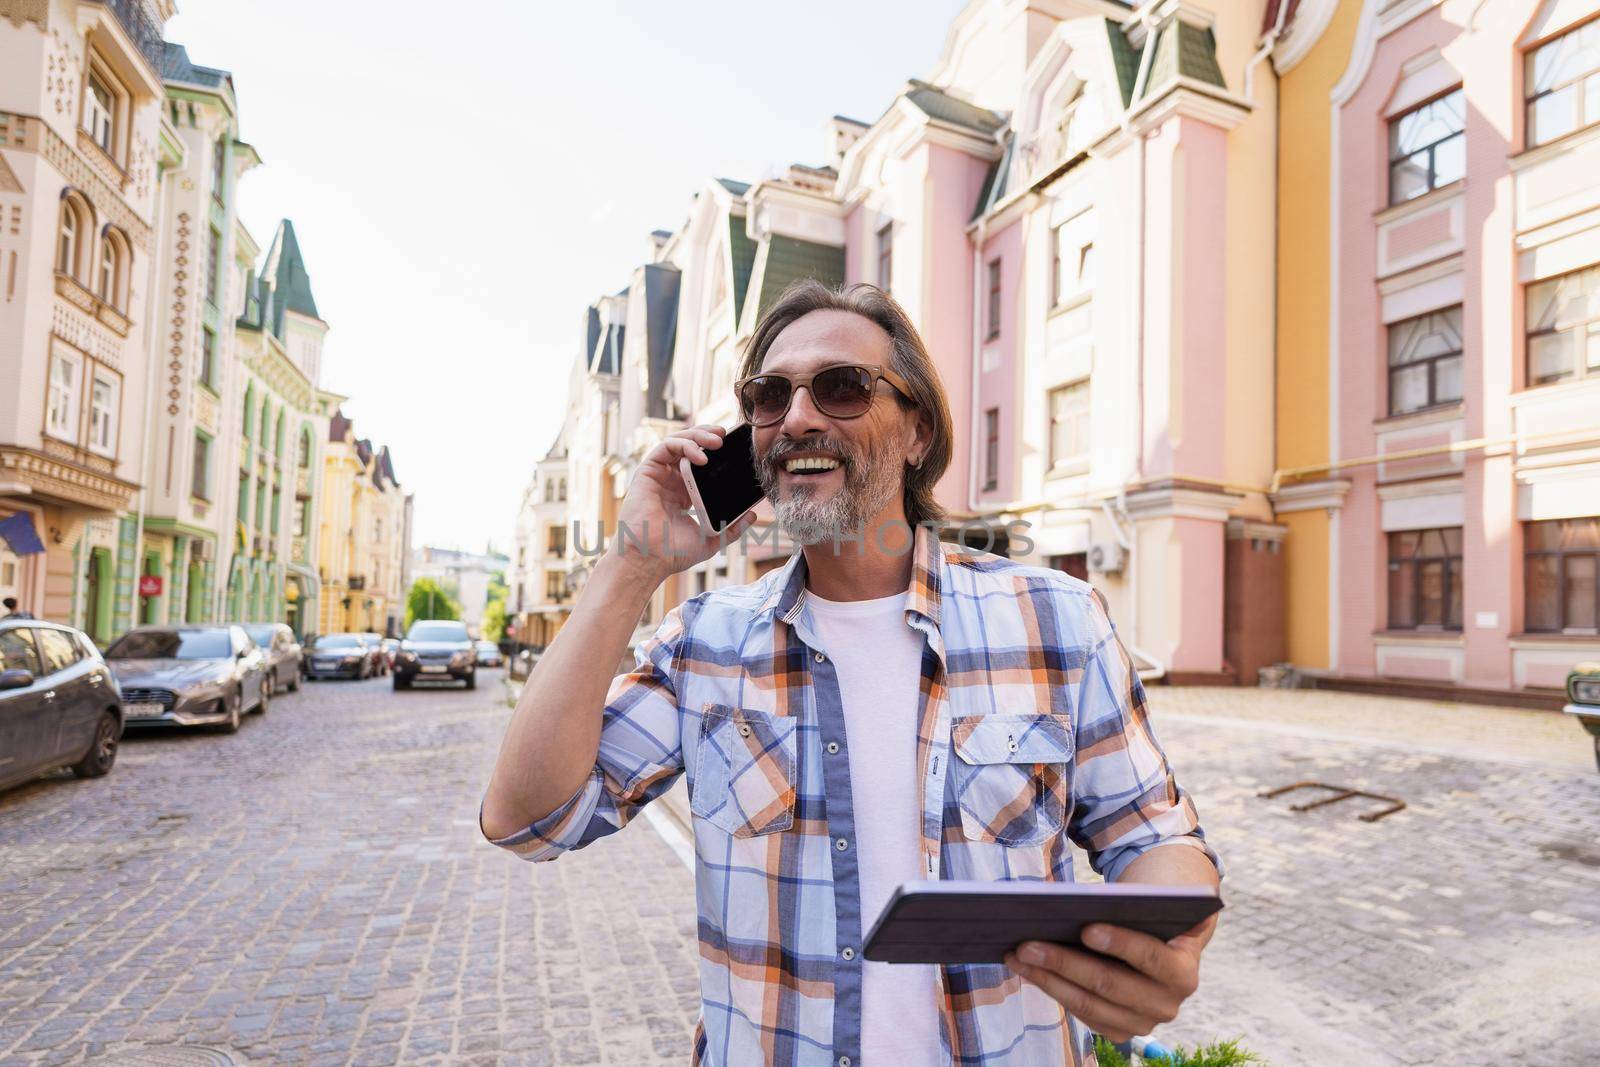 Happy smiling middle aged man with grey beard talking on the phone holding digital tablet in hand standing outdoors in old city background wearing plaid shirt and sunglasses. Freelancer traveling man by LipikStockMedia